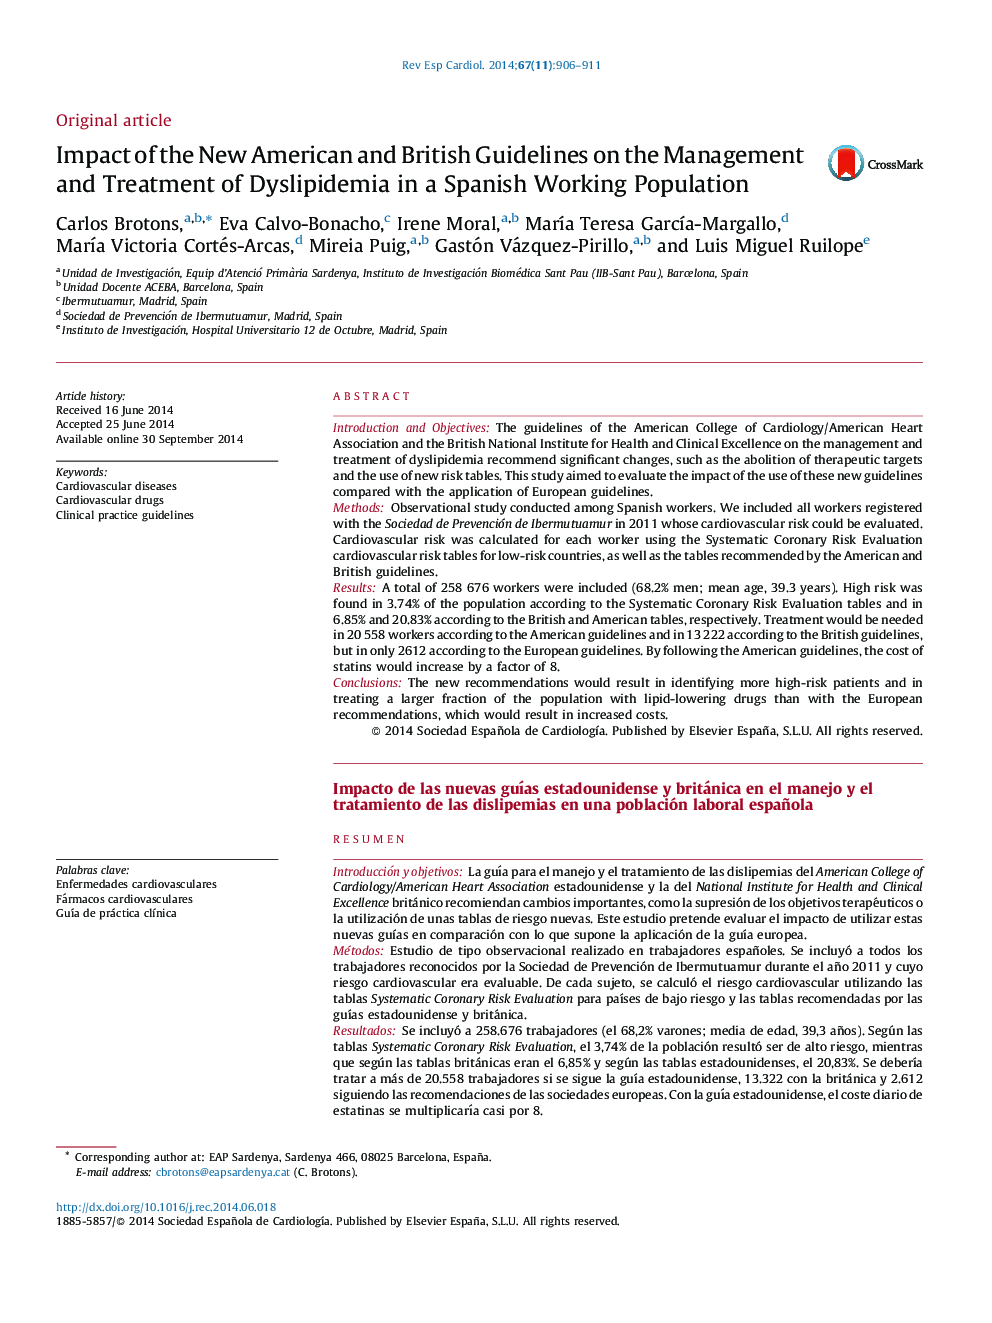 Impact of the New American and British Guidelines on the Management and Treatment of Dyslipidemia in a Spanish Working Population